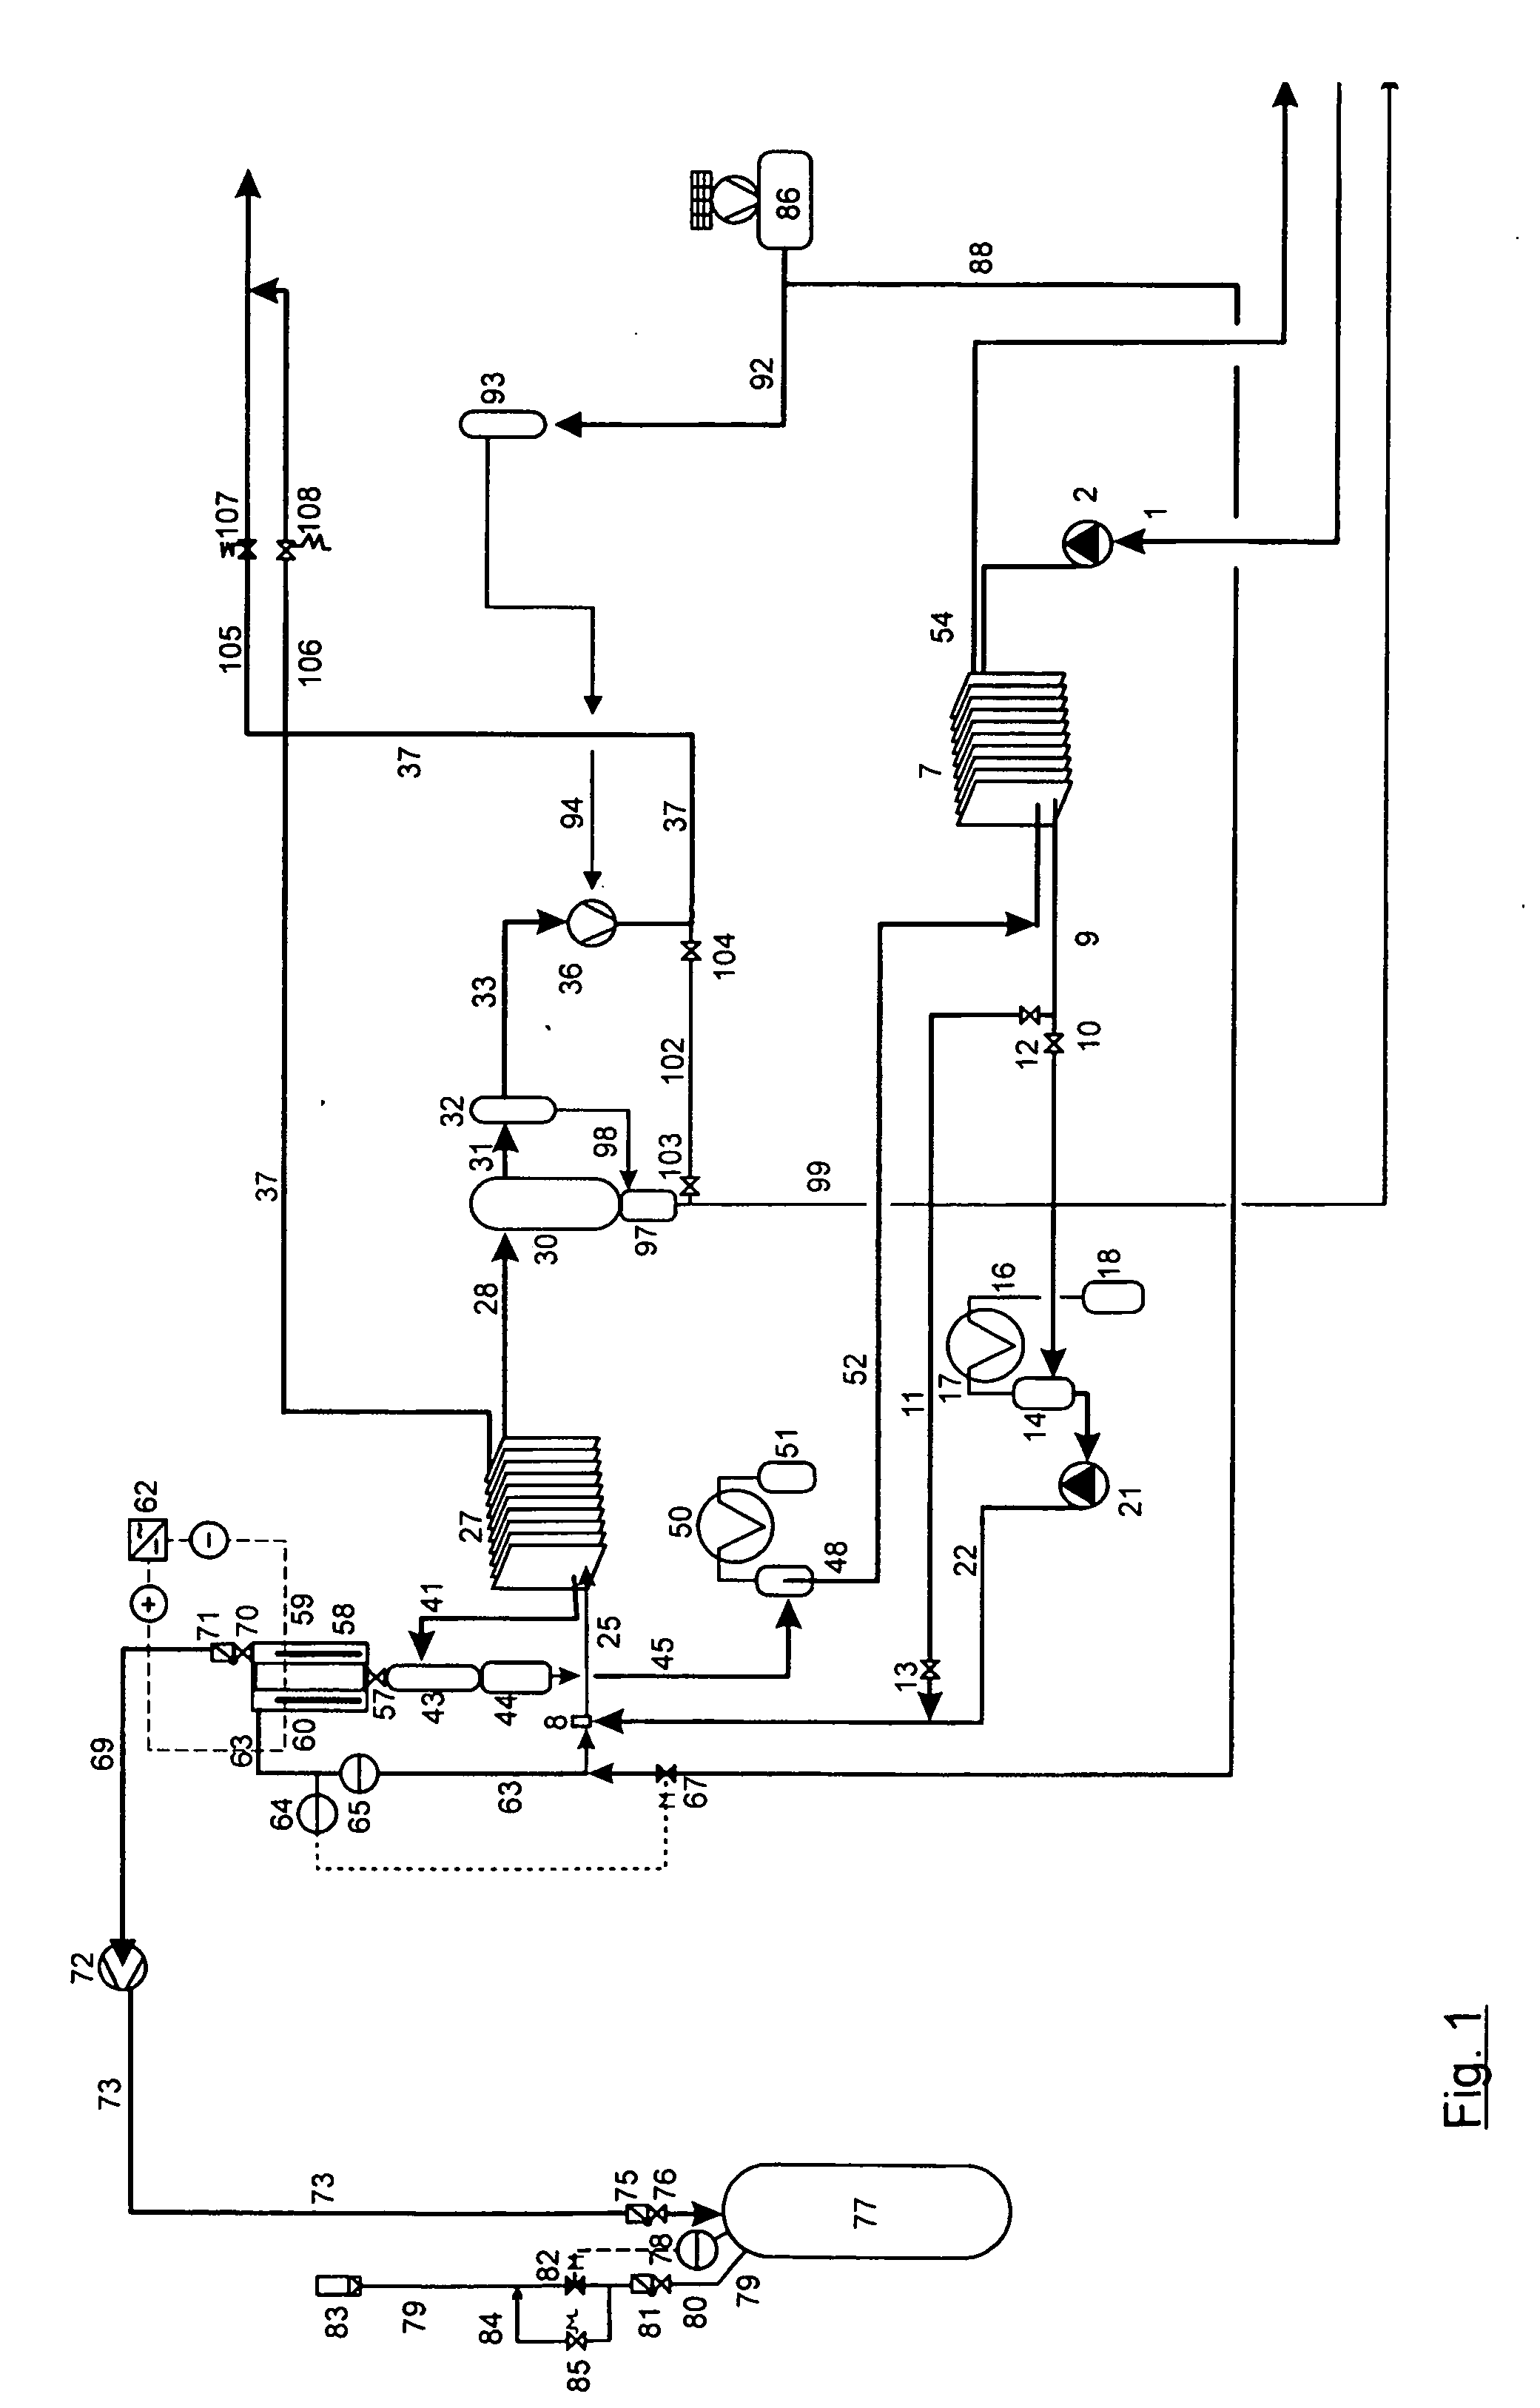 Method and device for treating liquids, using an electrolytic stage